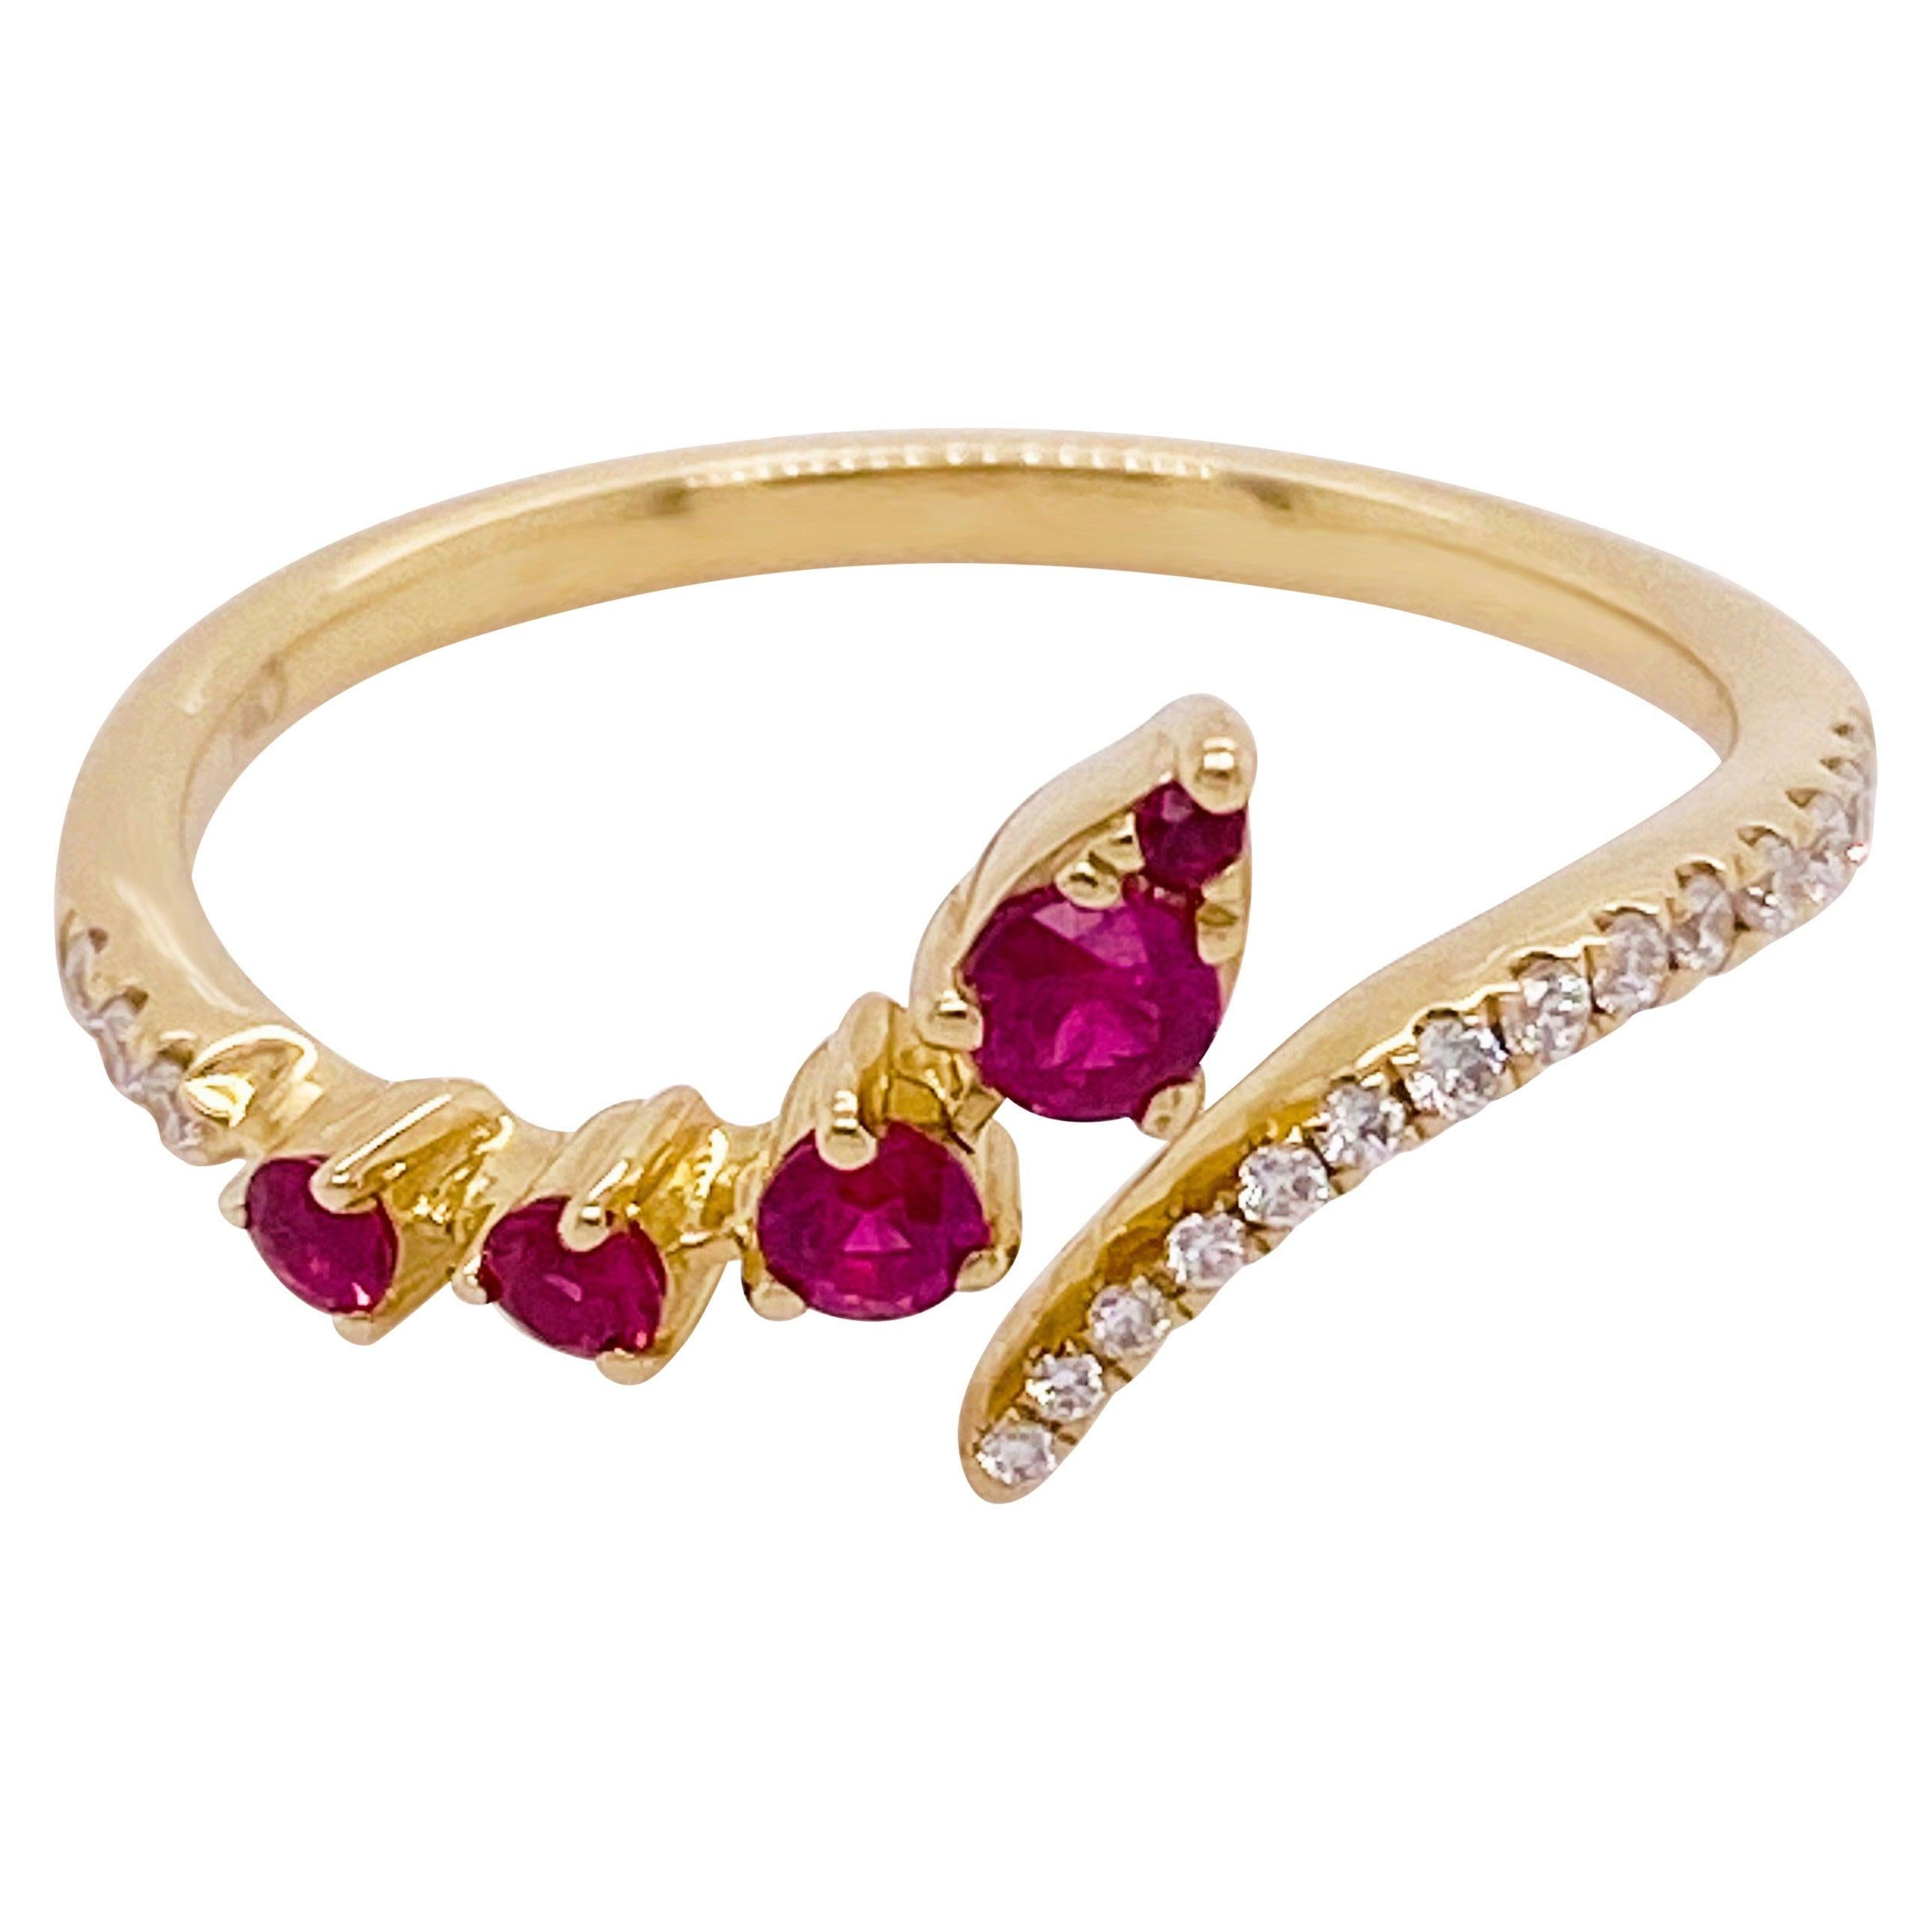 For Sale:  Ruby Diamond Ring, Red Ruby, 14k Yellow Gold, Bypass, Stack, Fashion, Freeform